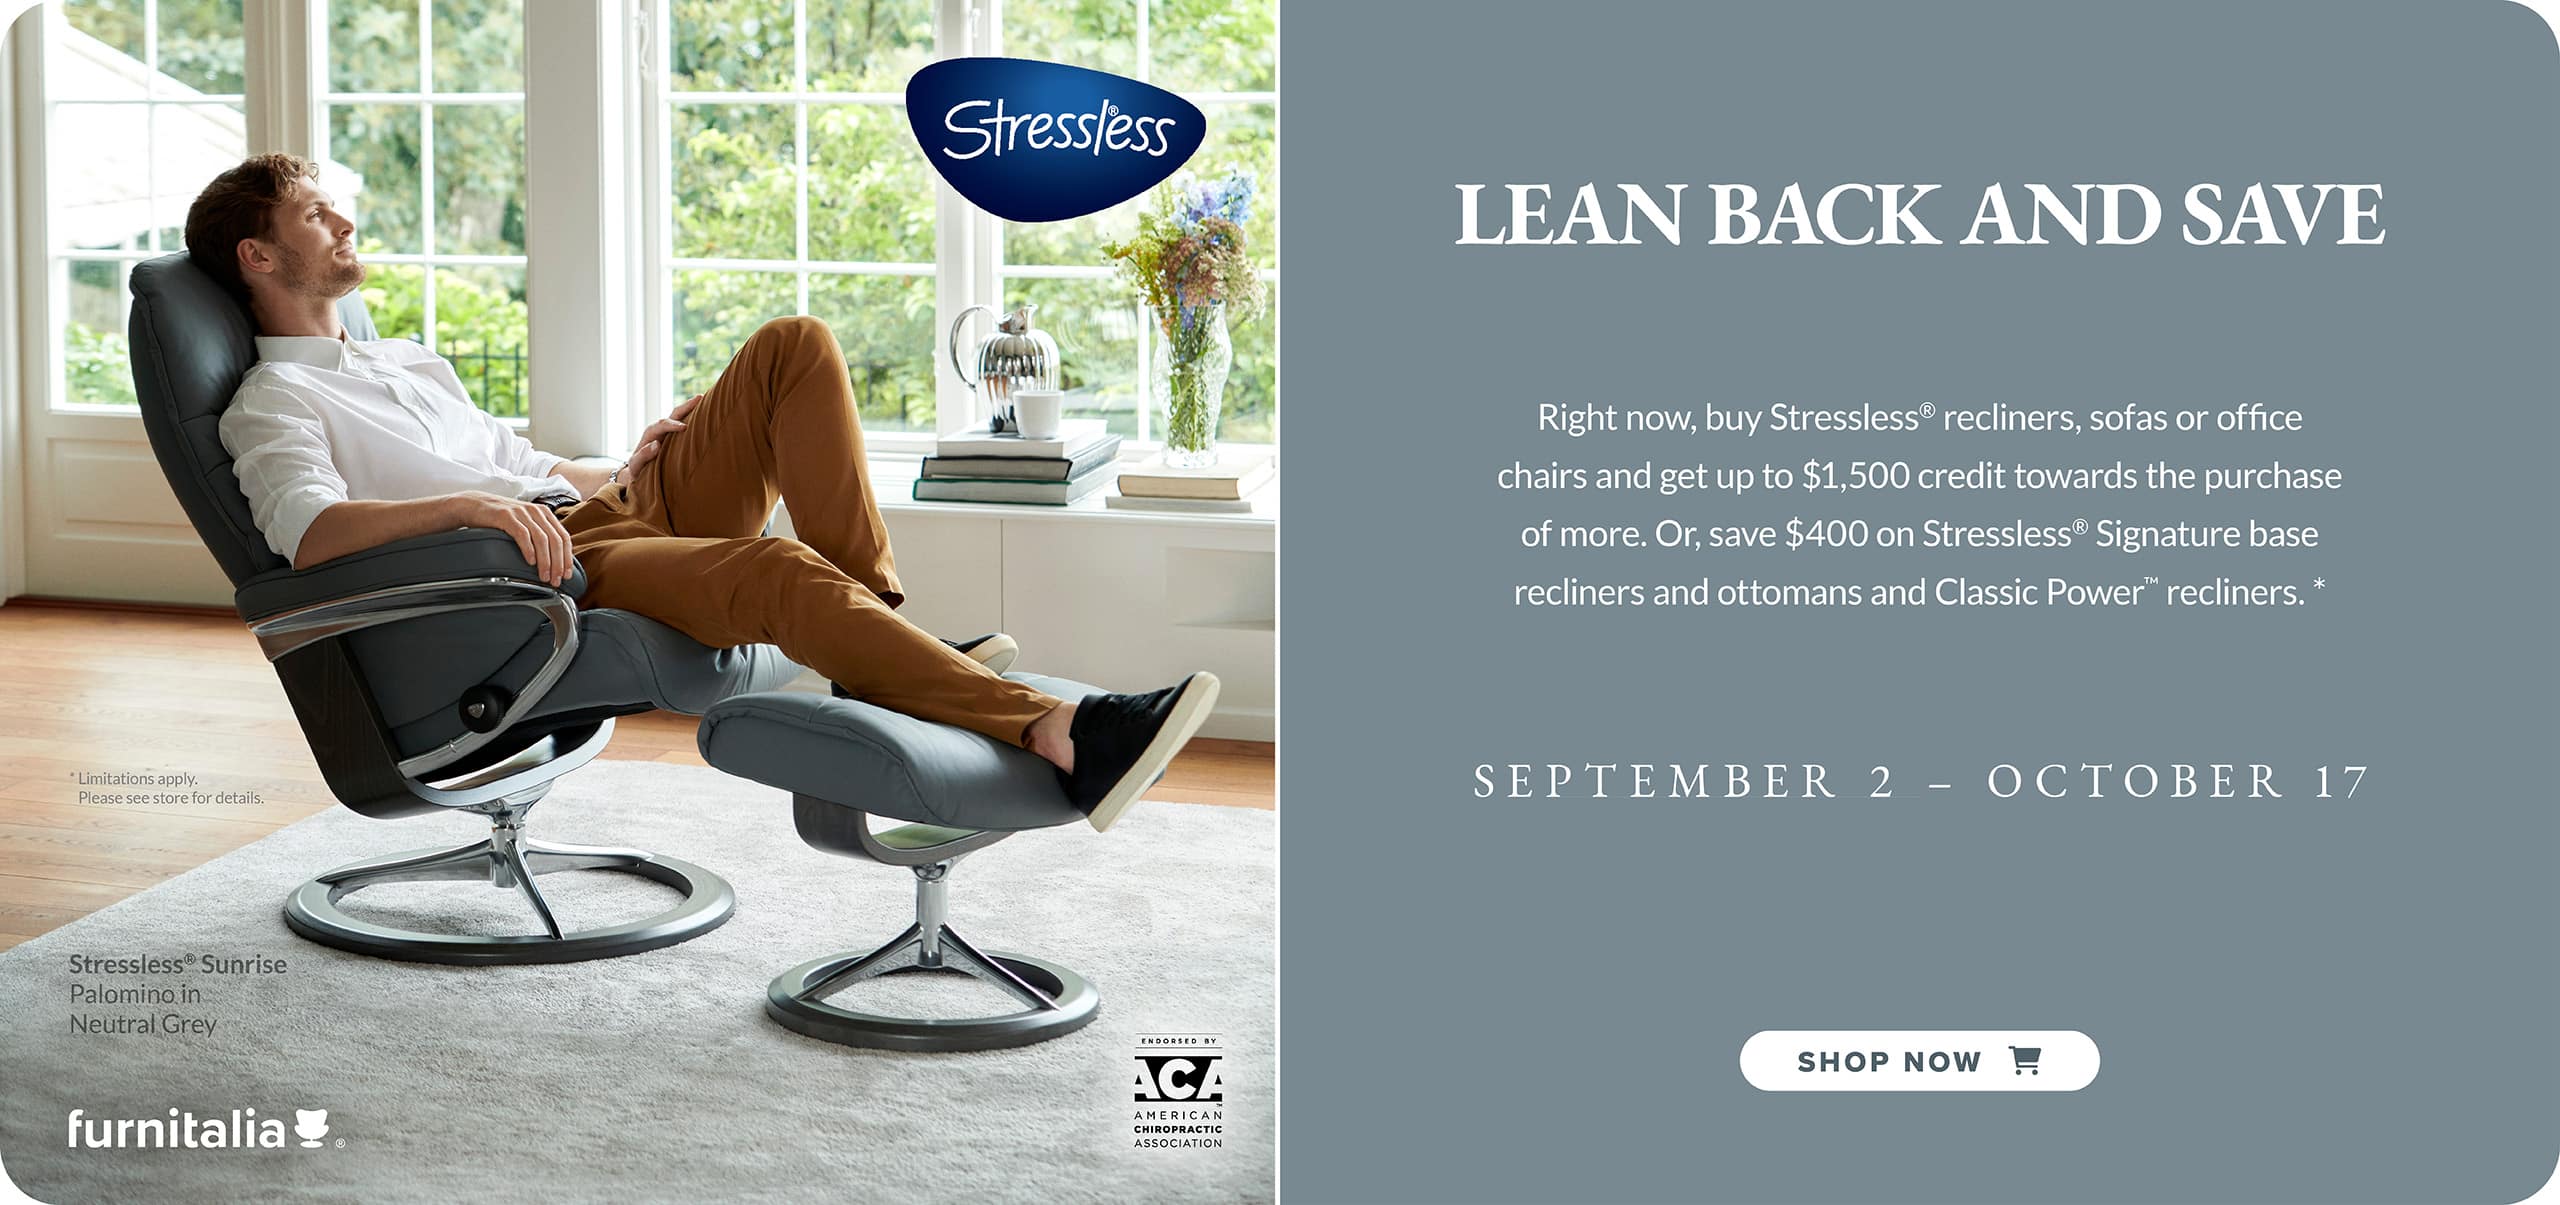 Stressless Promo: Get up to $1,500 Stressless Credit or save $400 on recliner